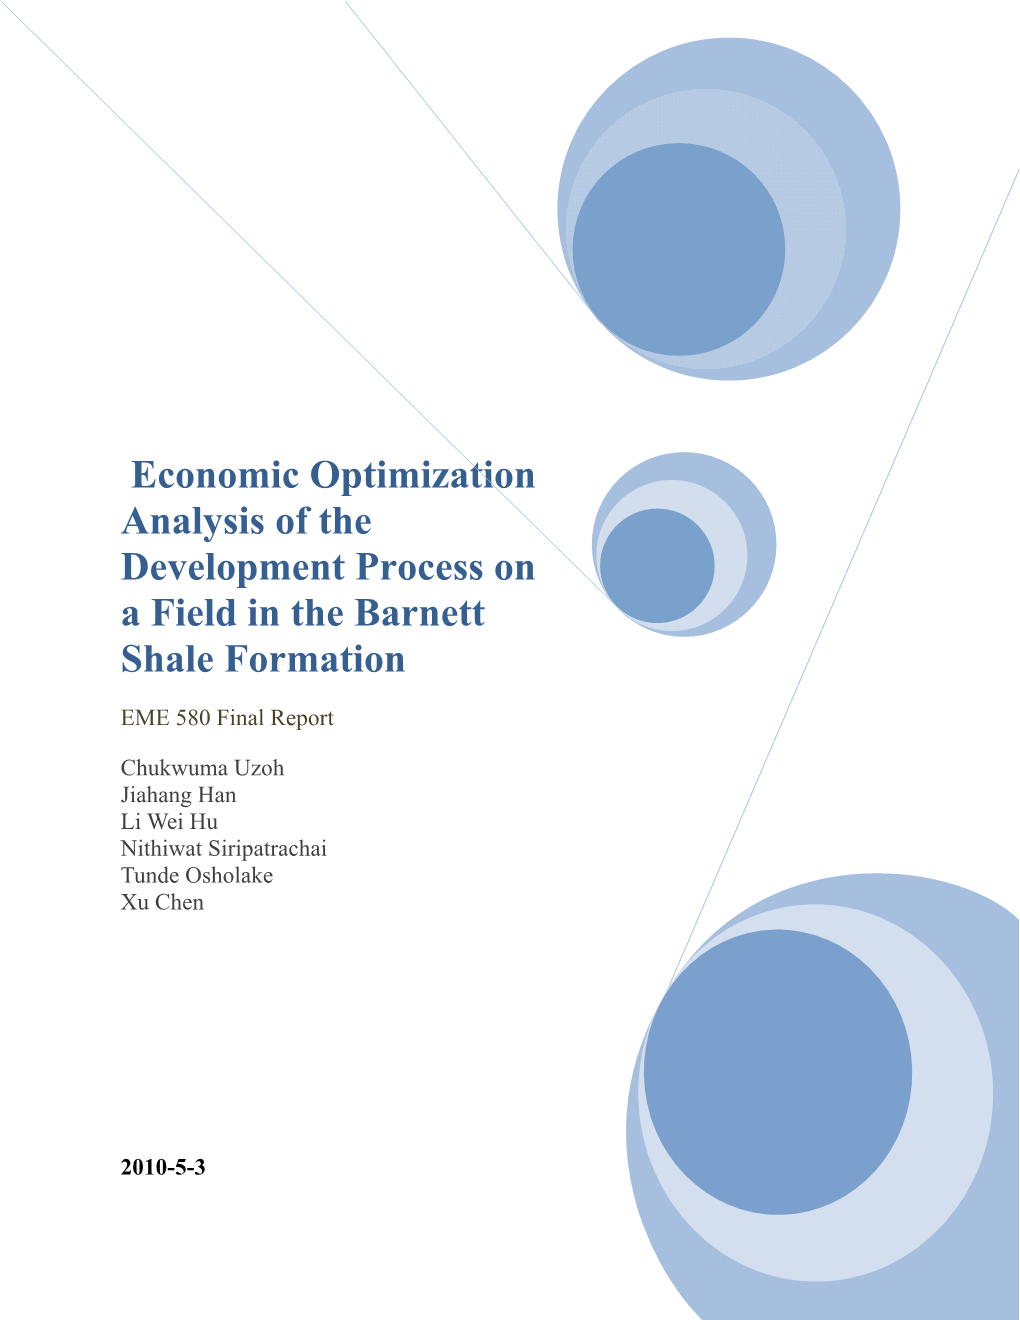 Economic Optimization Analysis of the Development Process on a Field in the Barnett Shale Formation